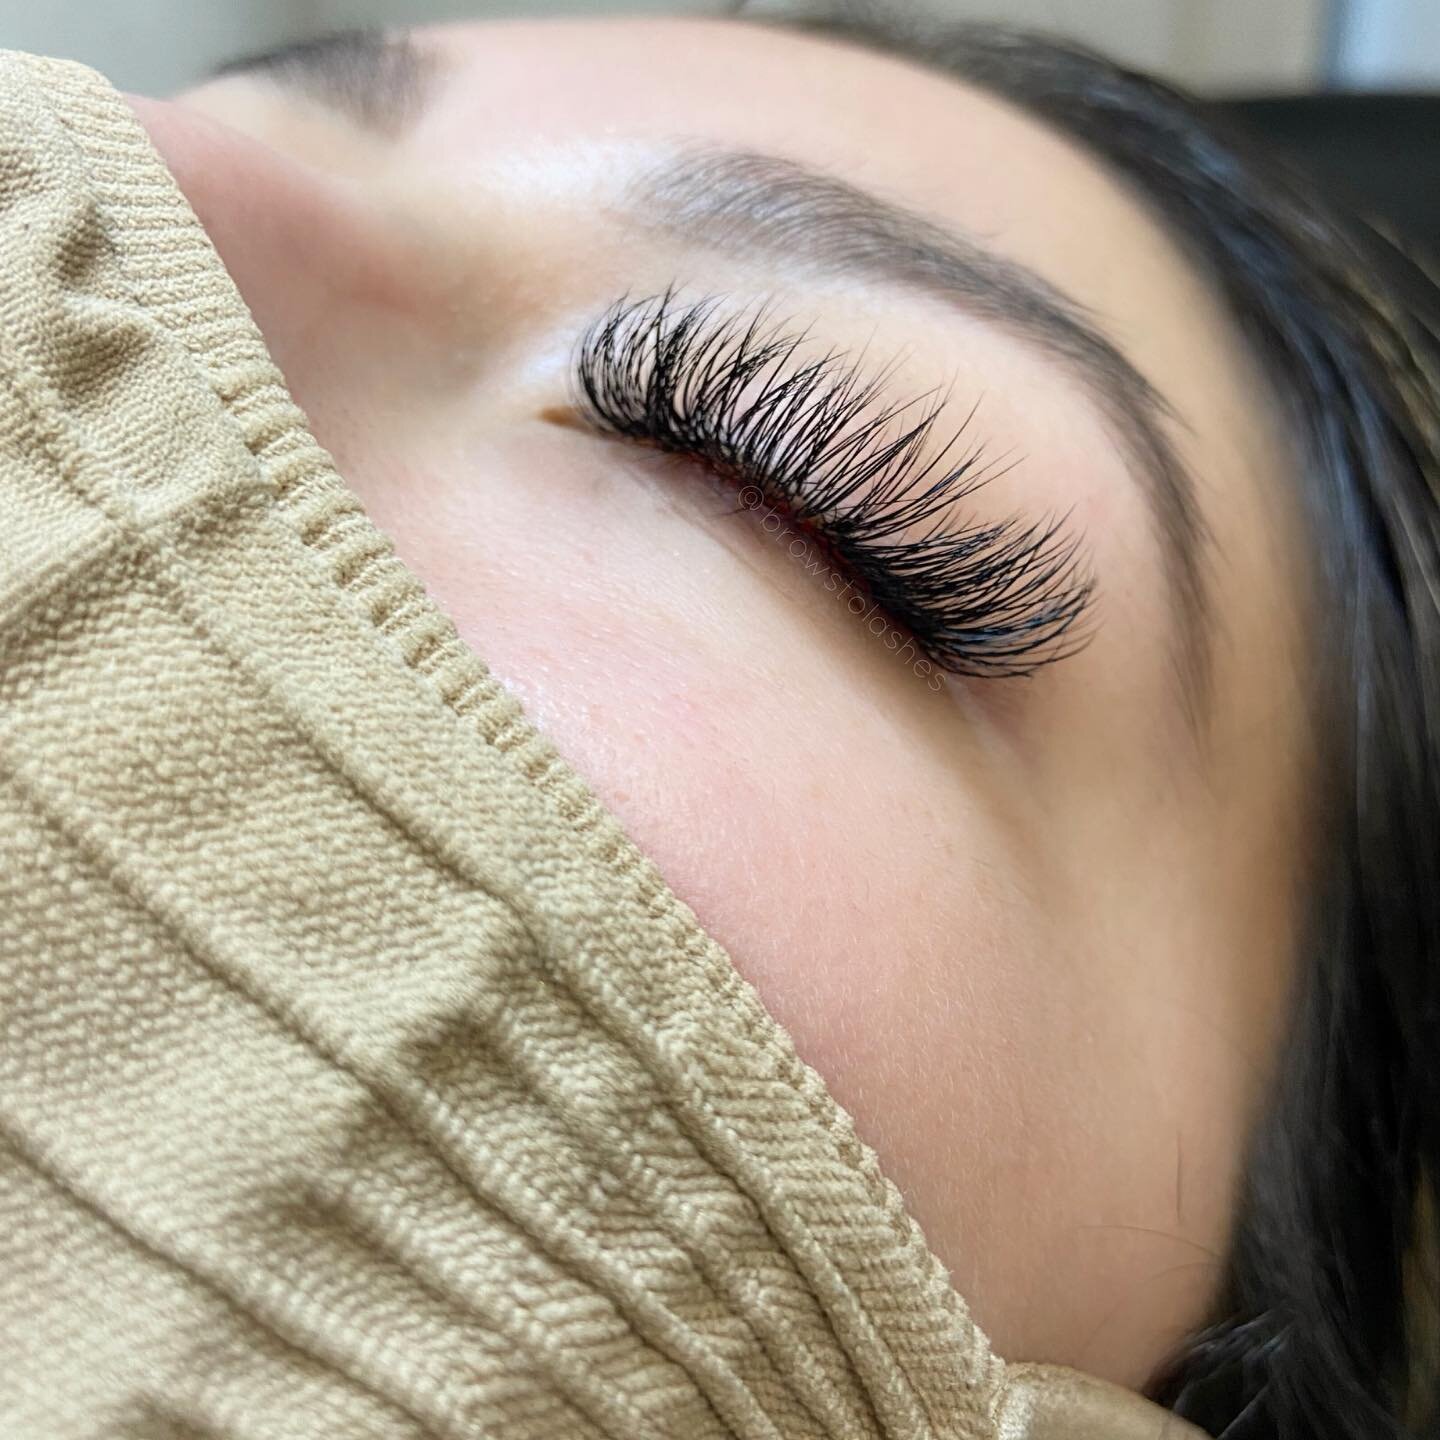 Sleeping beauty vibes ✨ Another view of the natural hybrid set from yesterday! One of our favorite go to styles nowadays are hybrid lashes. A perfect blend of classic and handmade volume fans to give a subtle glam look. What&rsquo;s your favorite las